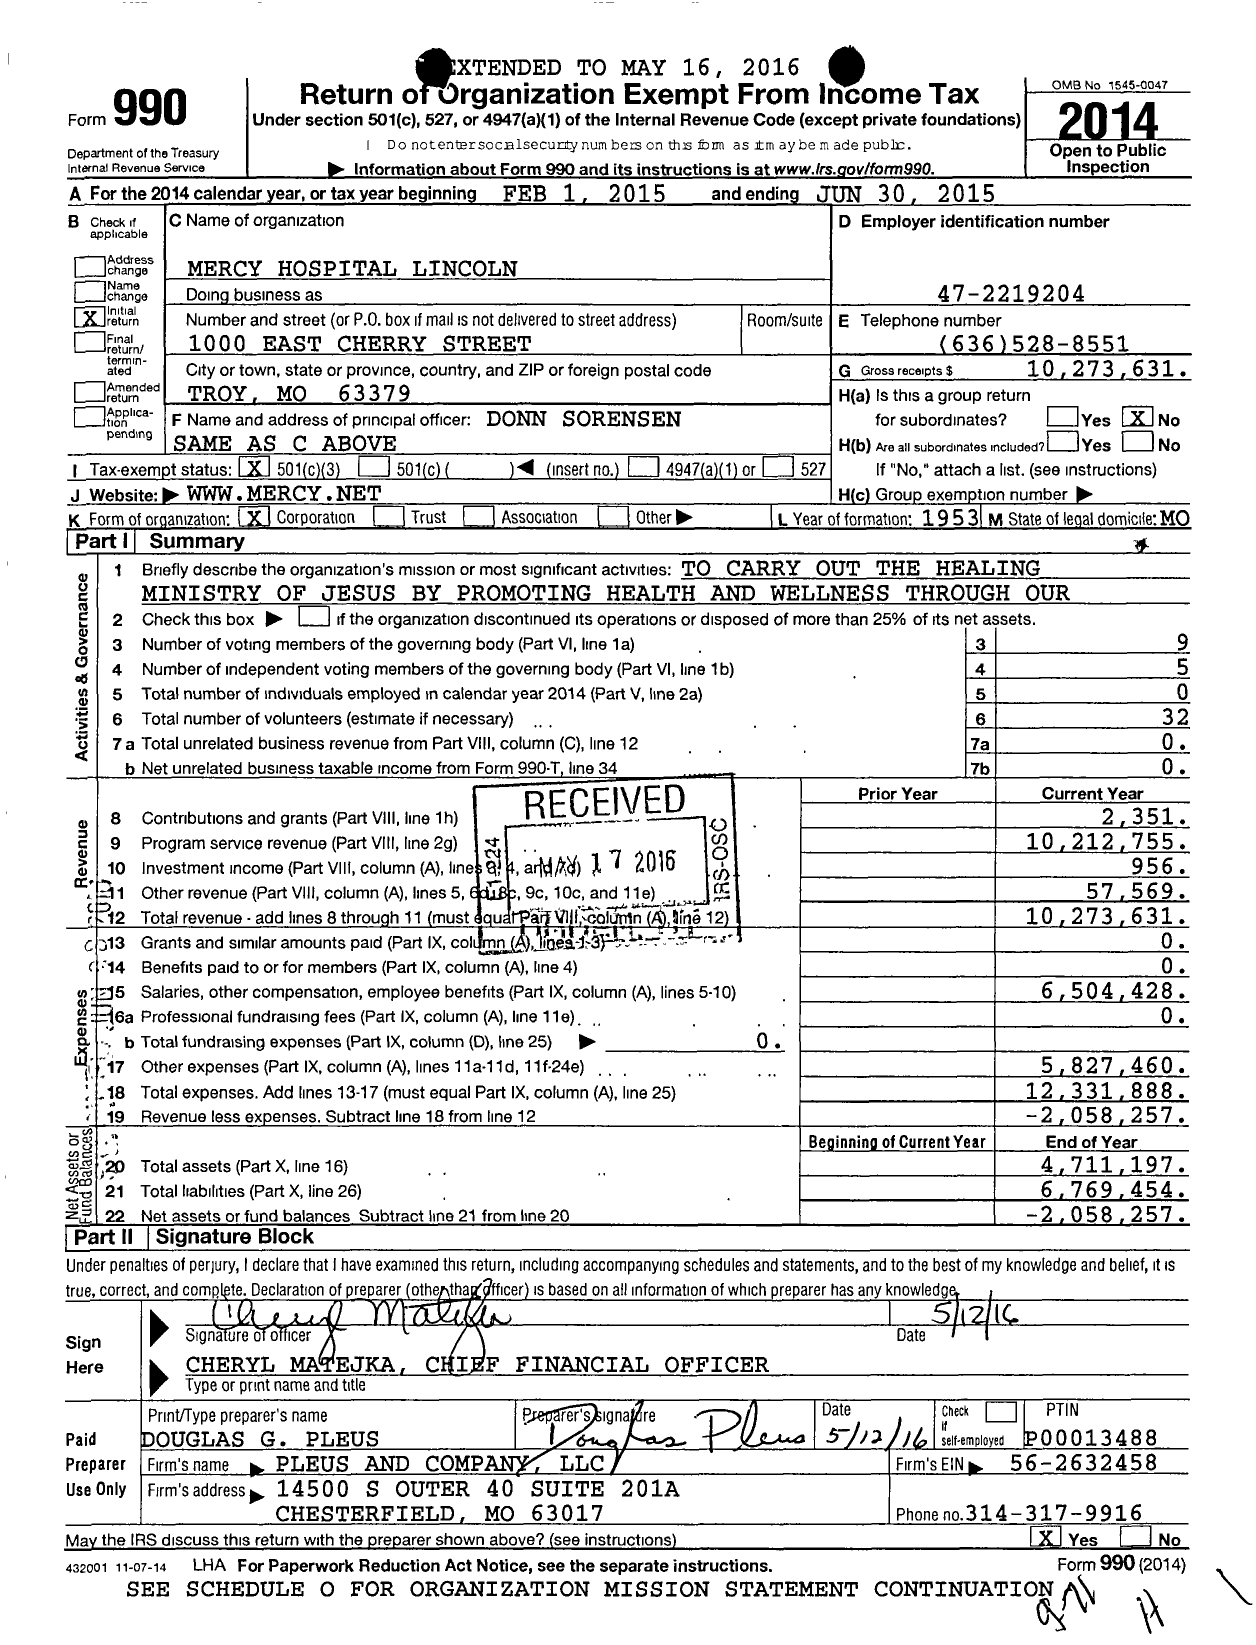 Image of first page of 2014 Form 990 for Mercy Hospital Lincoln